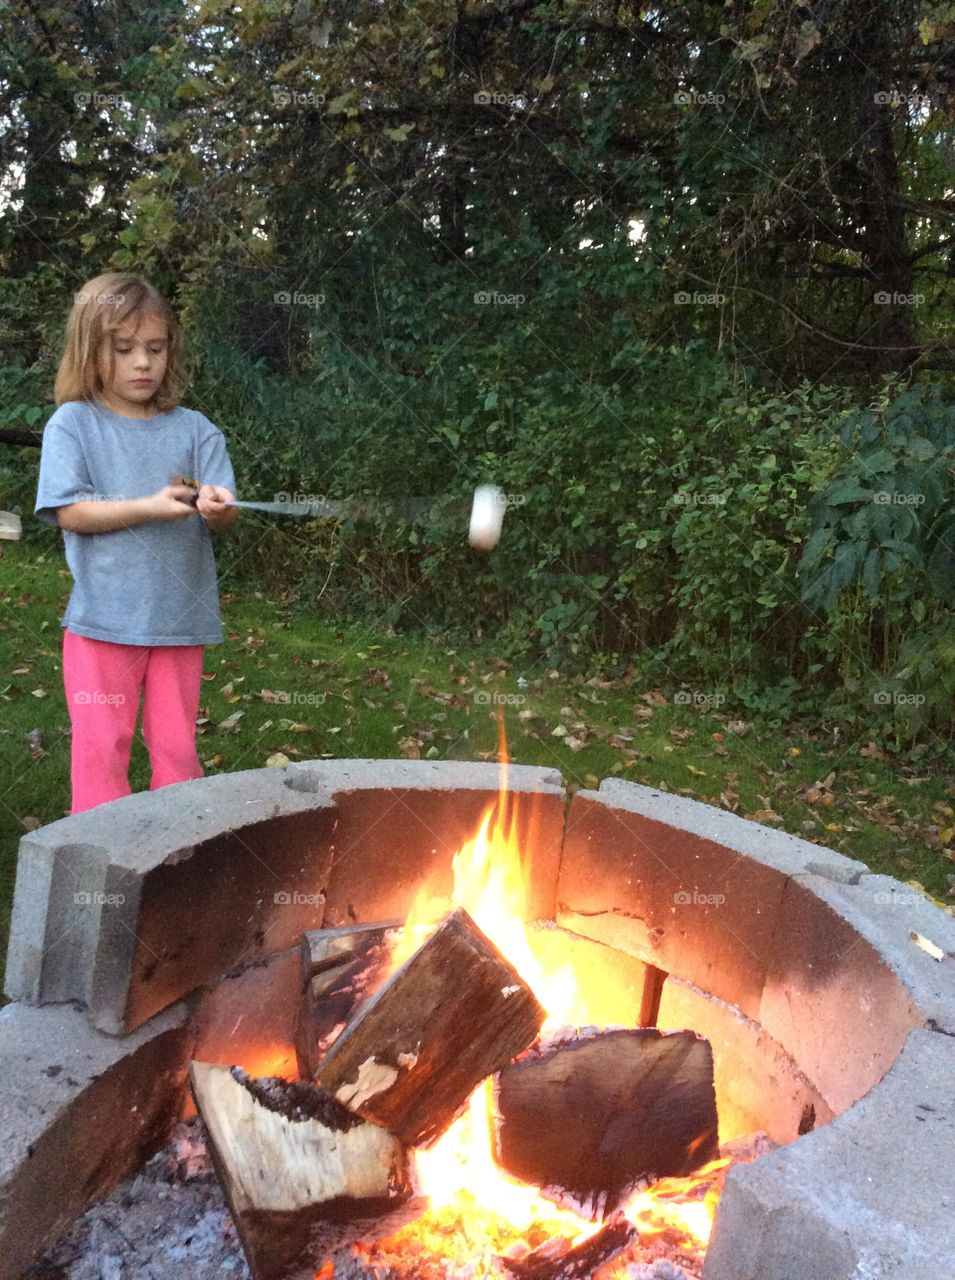 S'more time